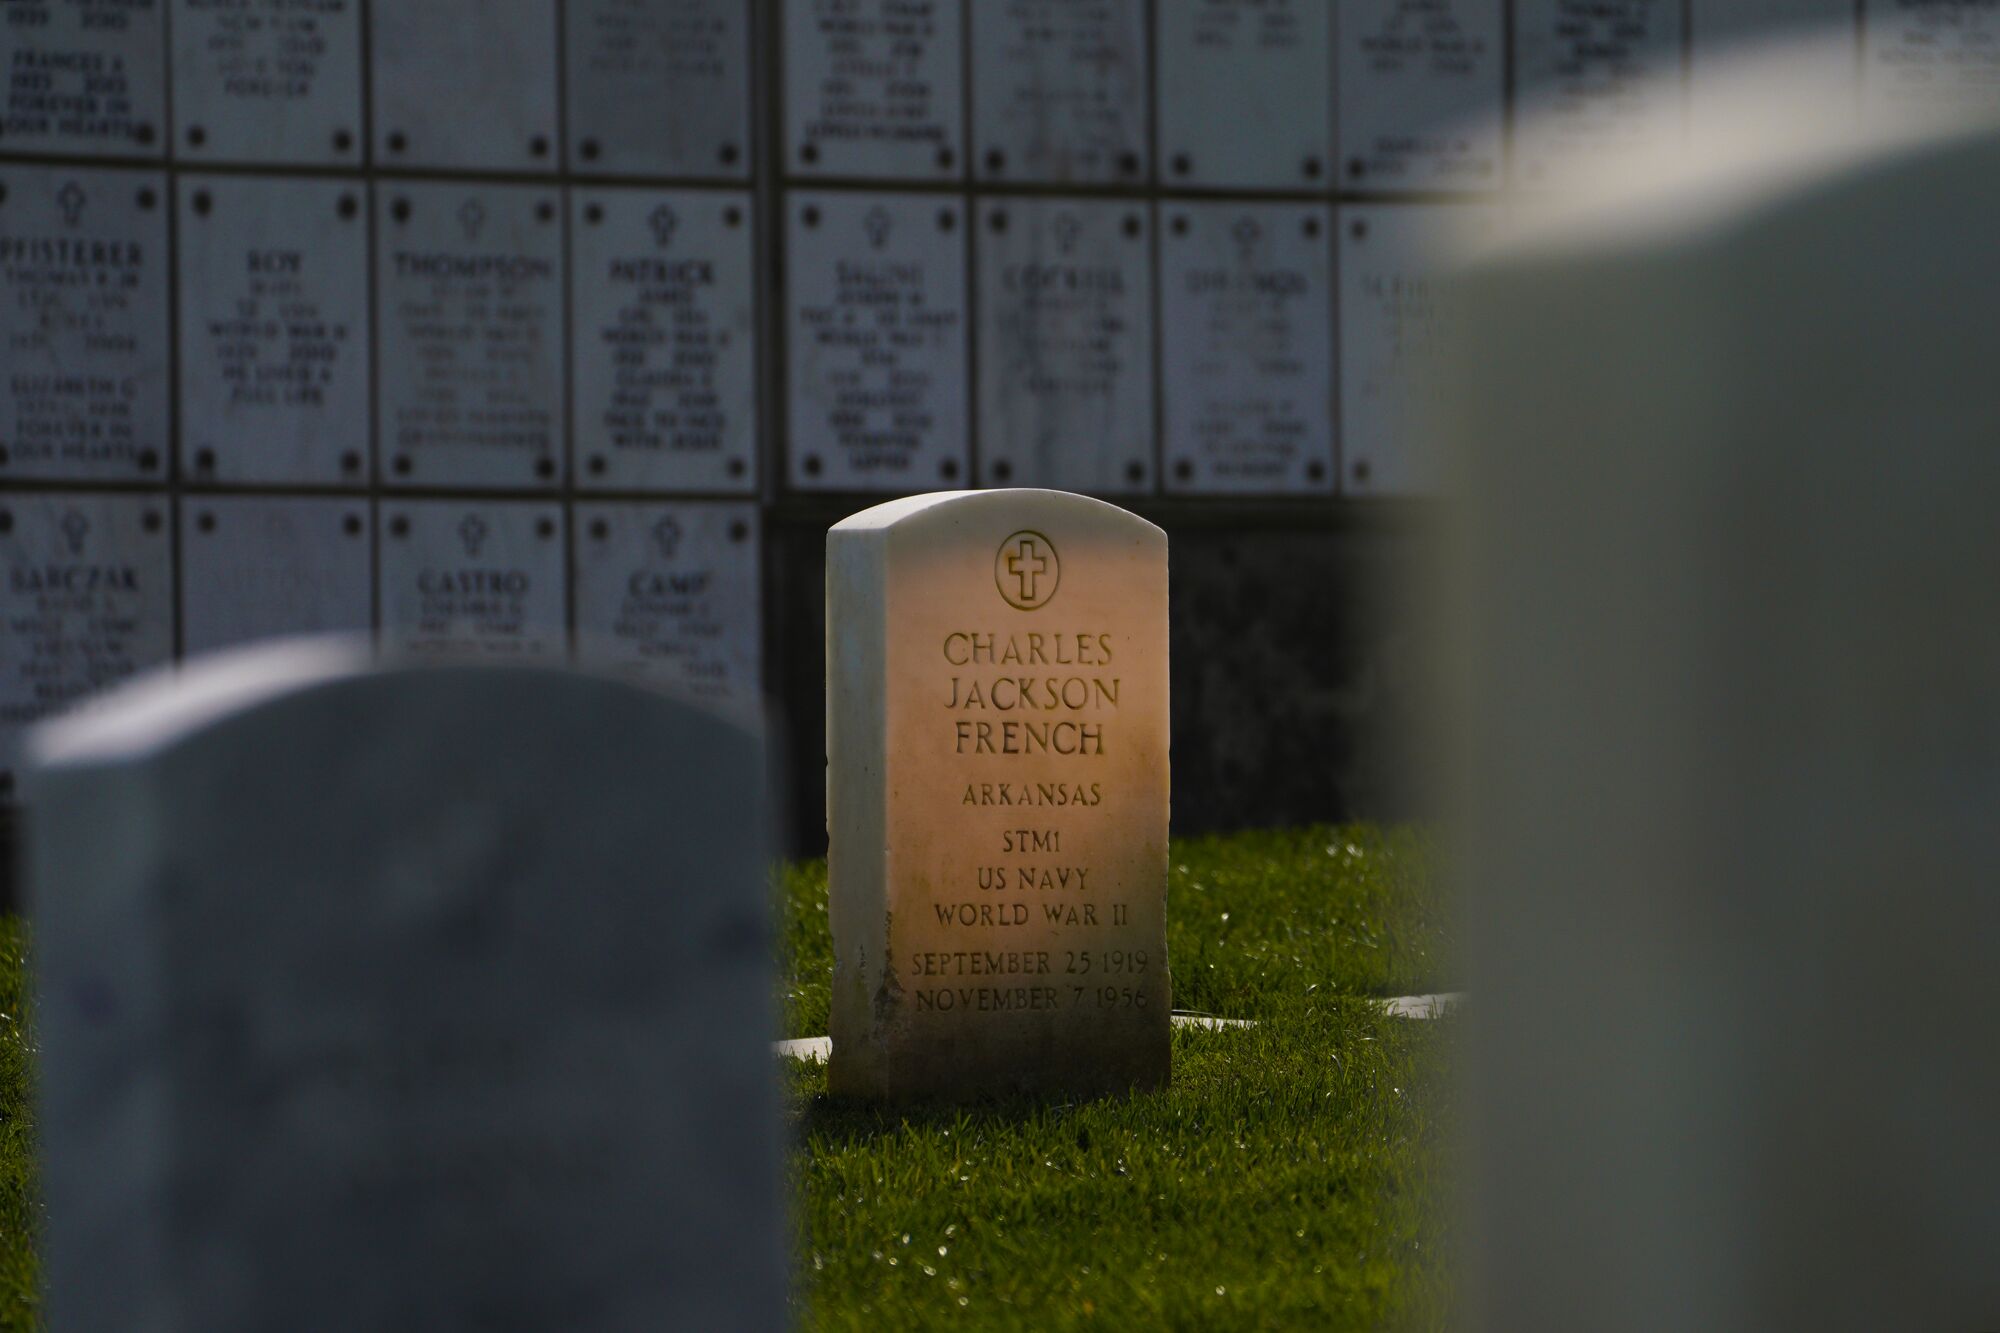 The headstone on the grave for Charles Jackson French at Fort Rosecrans National Cemetery.